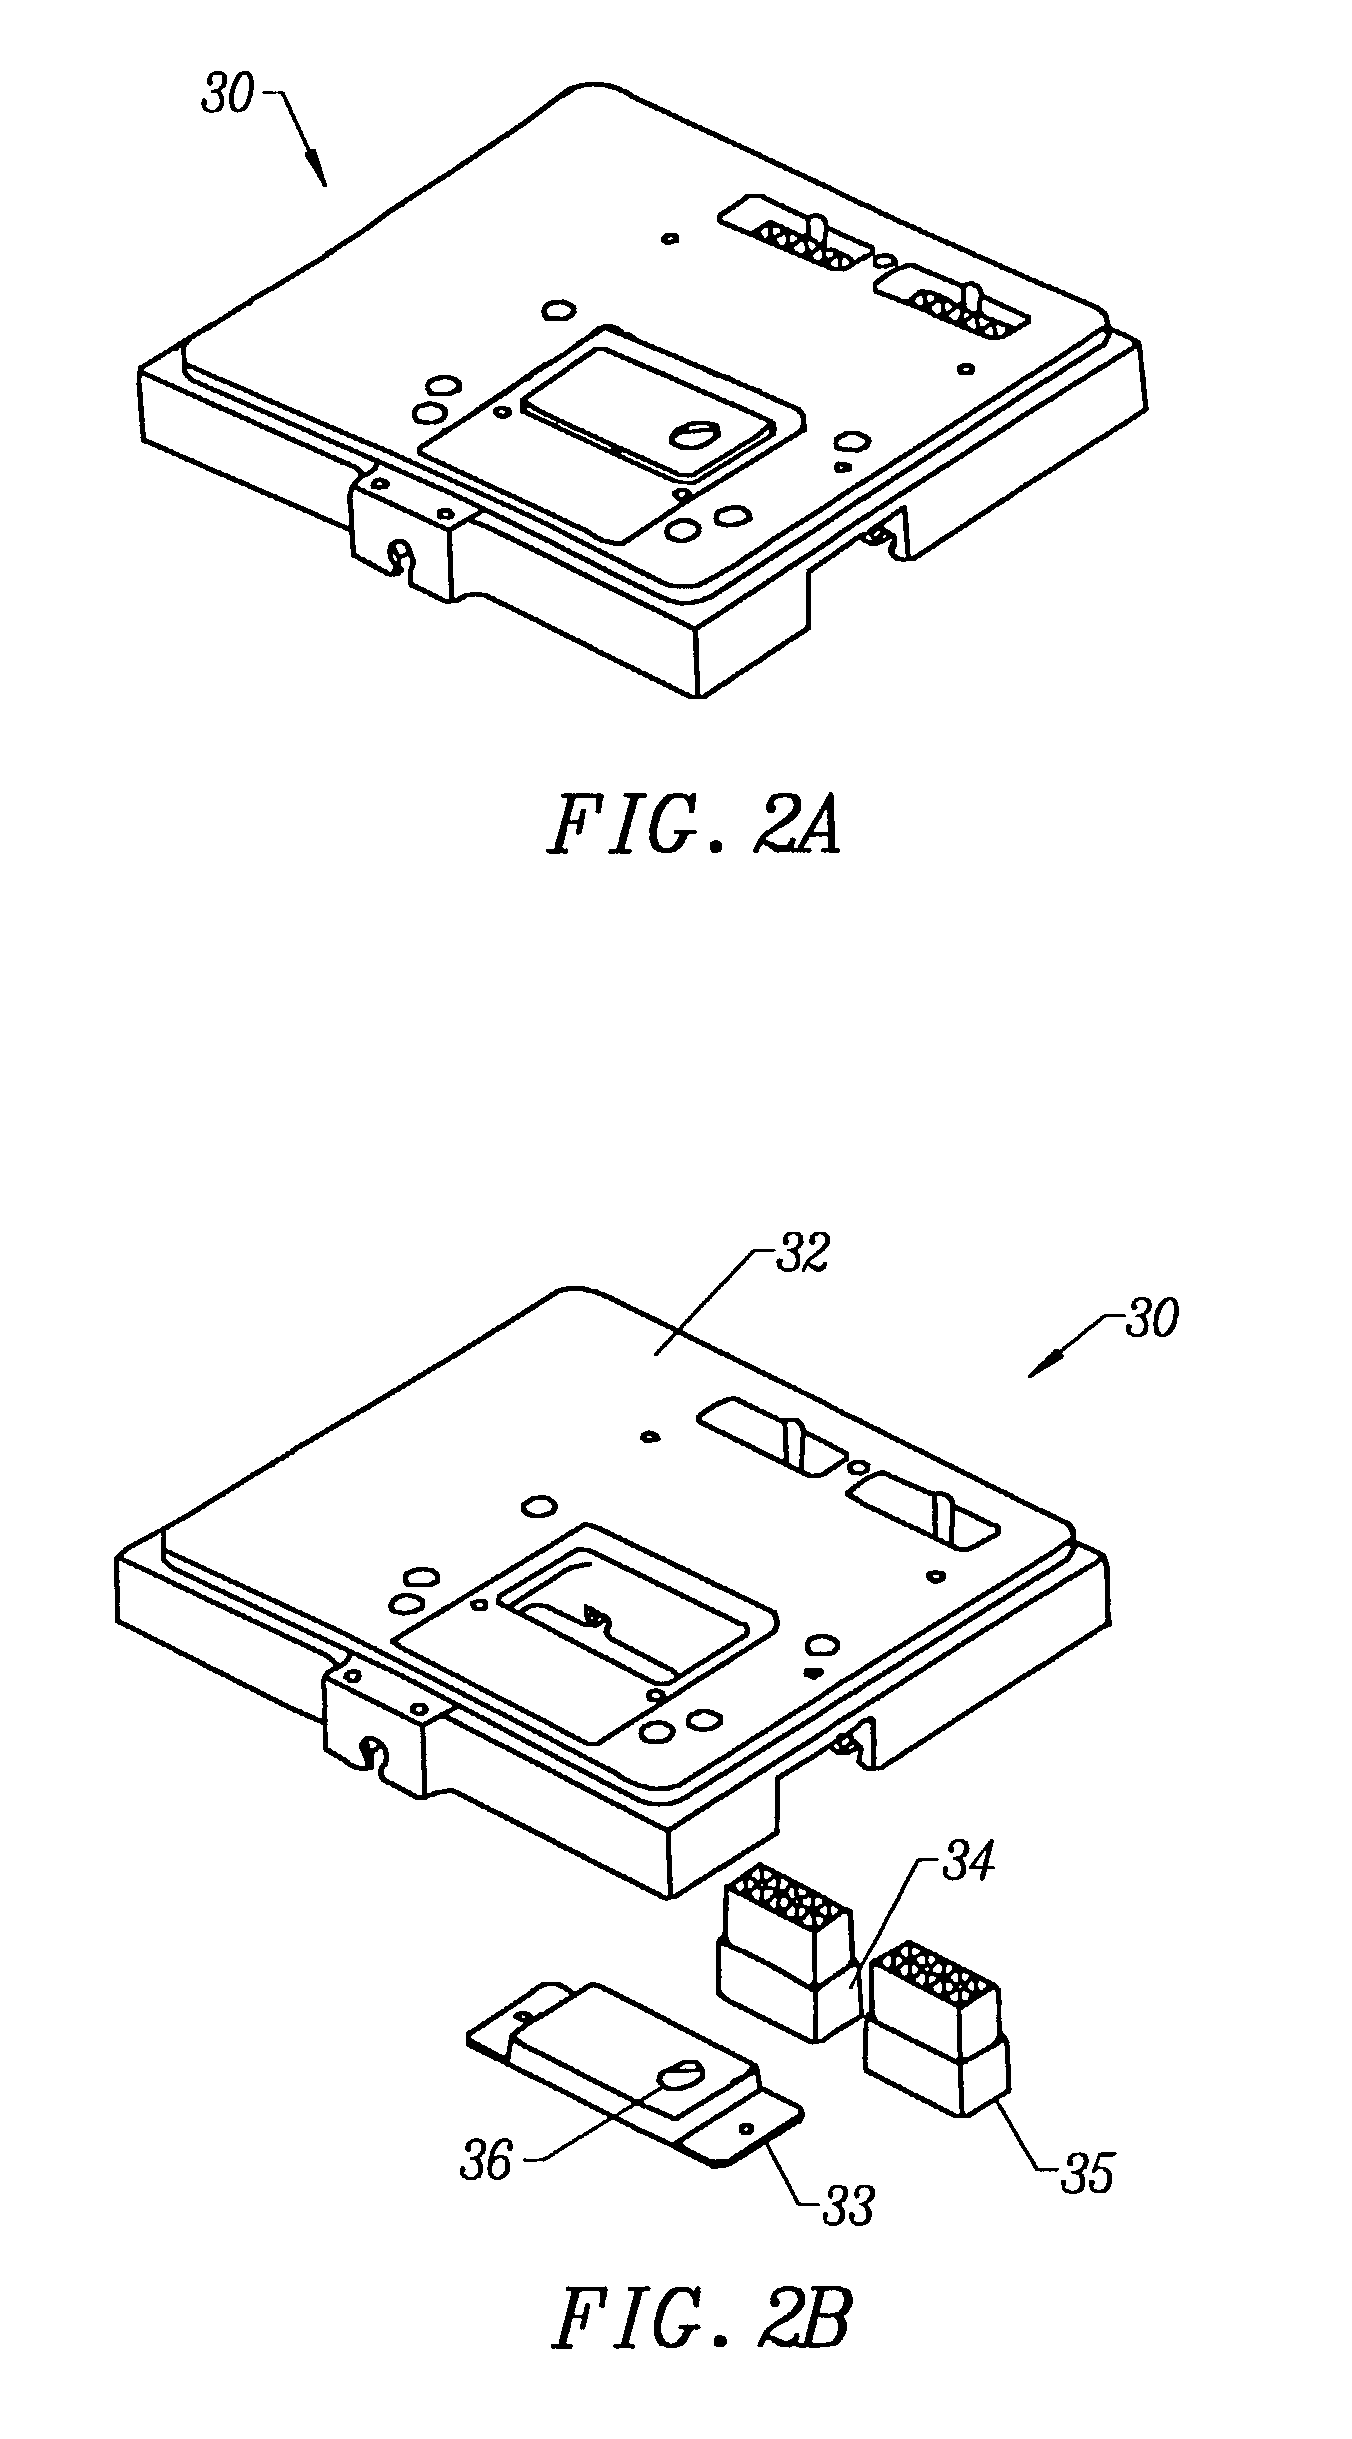 Microfluidic controller and detector system with self-calibration